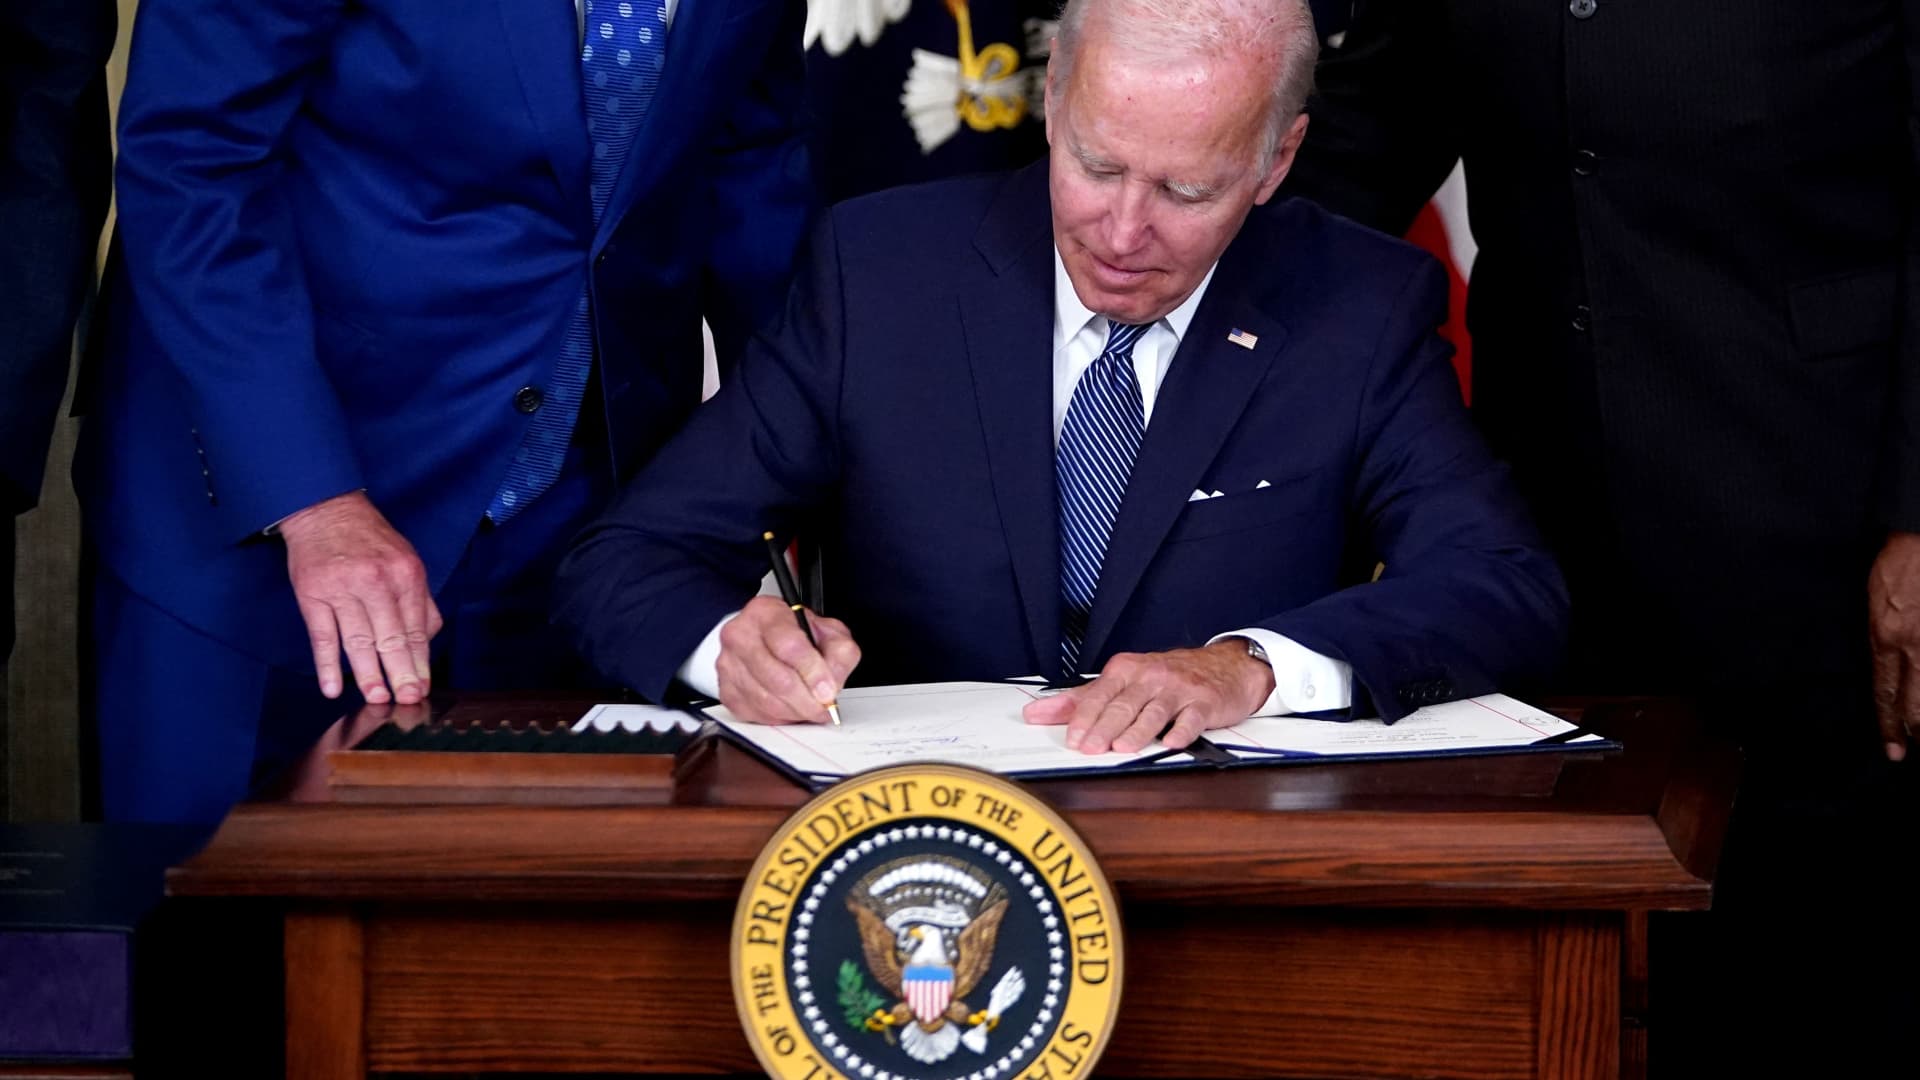 President Joe Biden signs the Inflation Reduction Act of 2022 at the White House on Aug. 16, 2022.